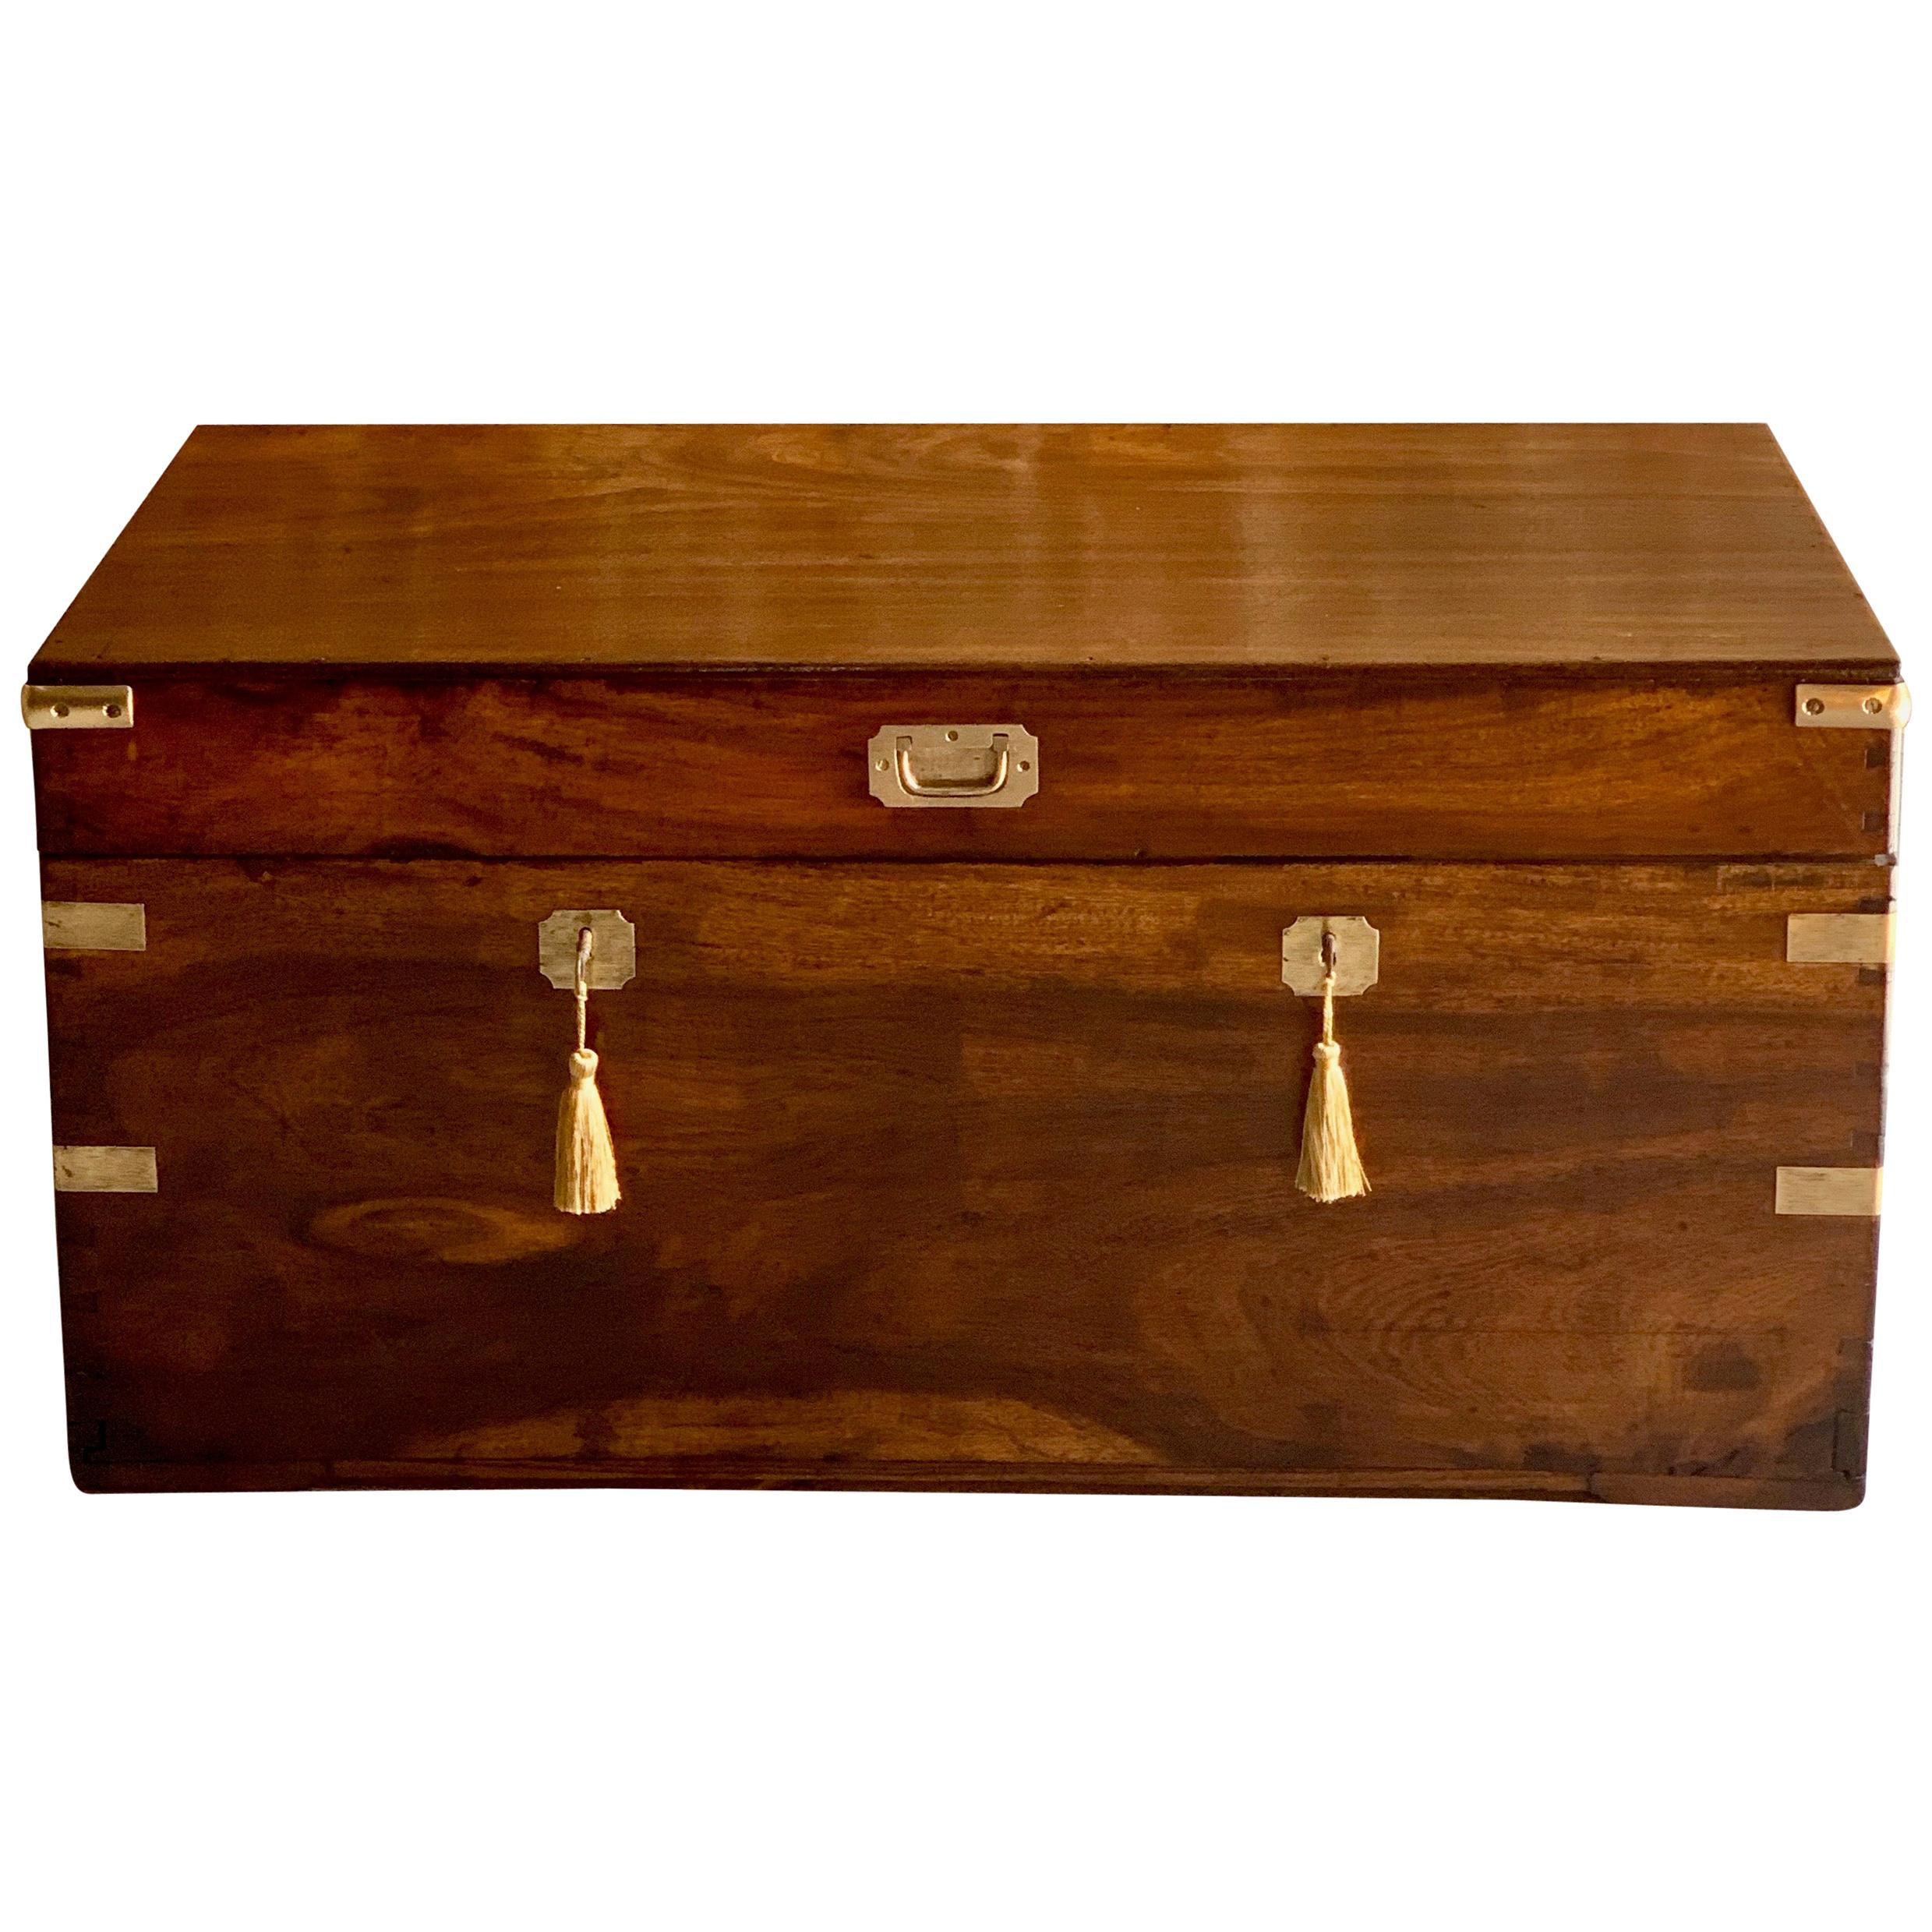 Victorian Military Campaign Trunk Chest Teak Camphor Wood, circa 1850 Number 25